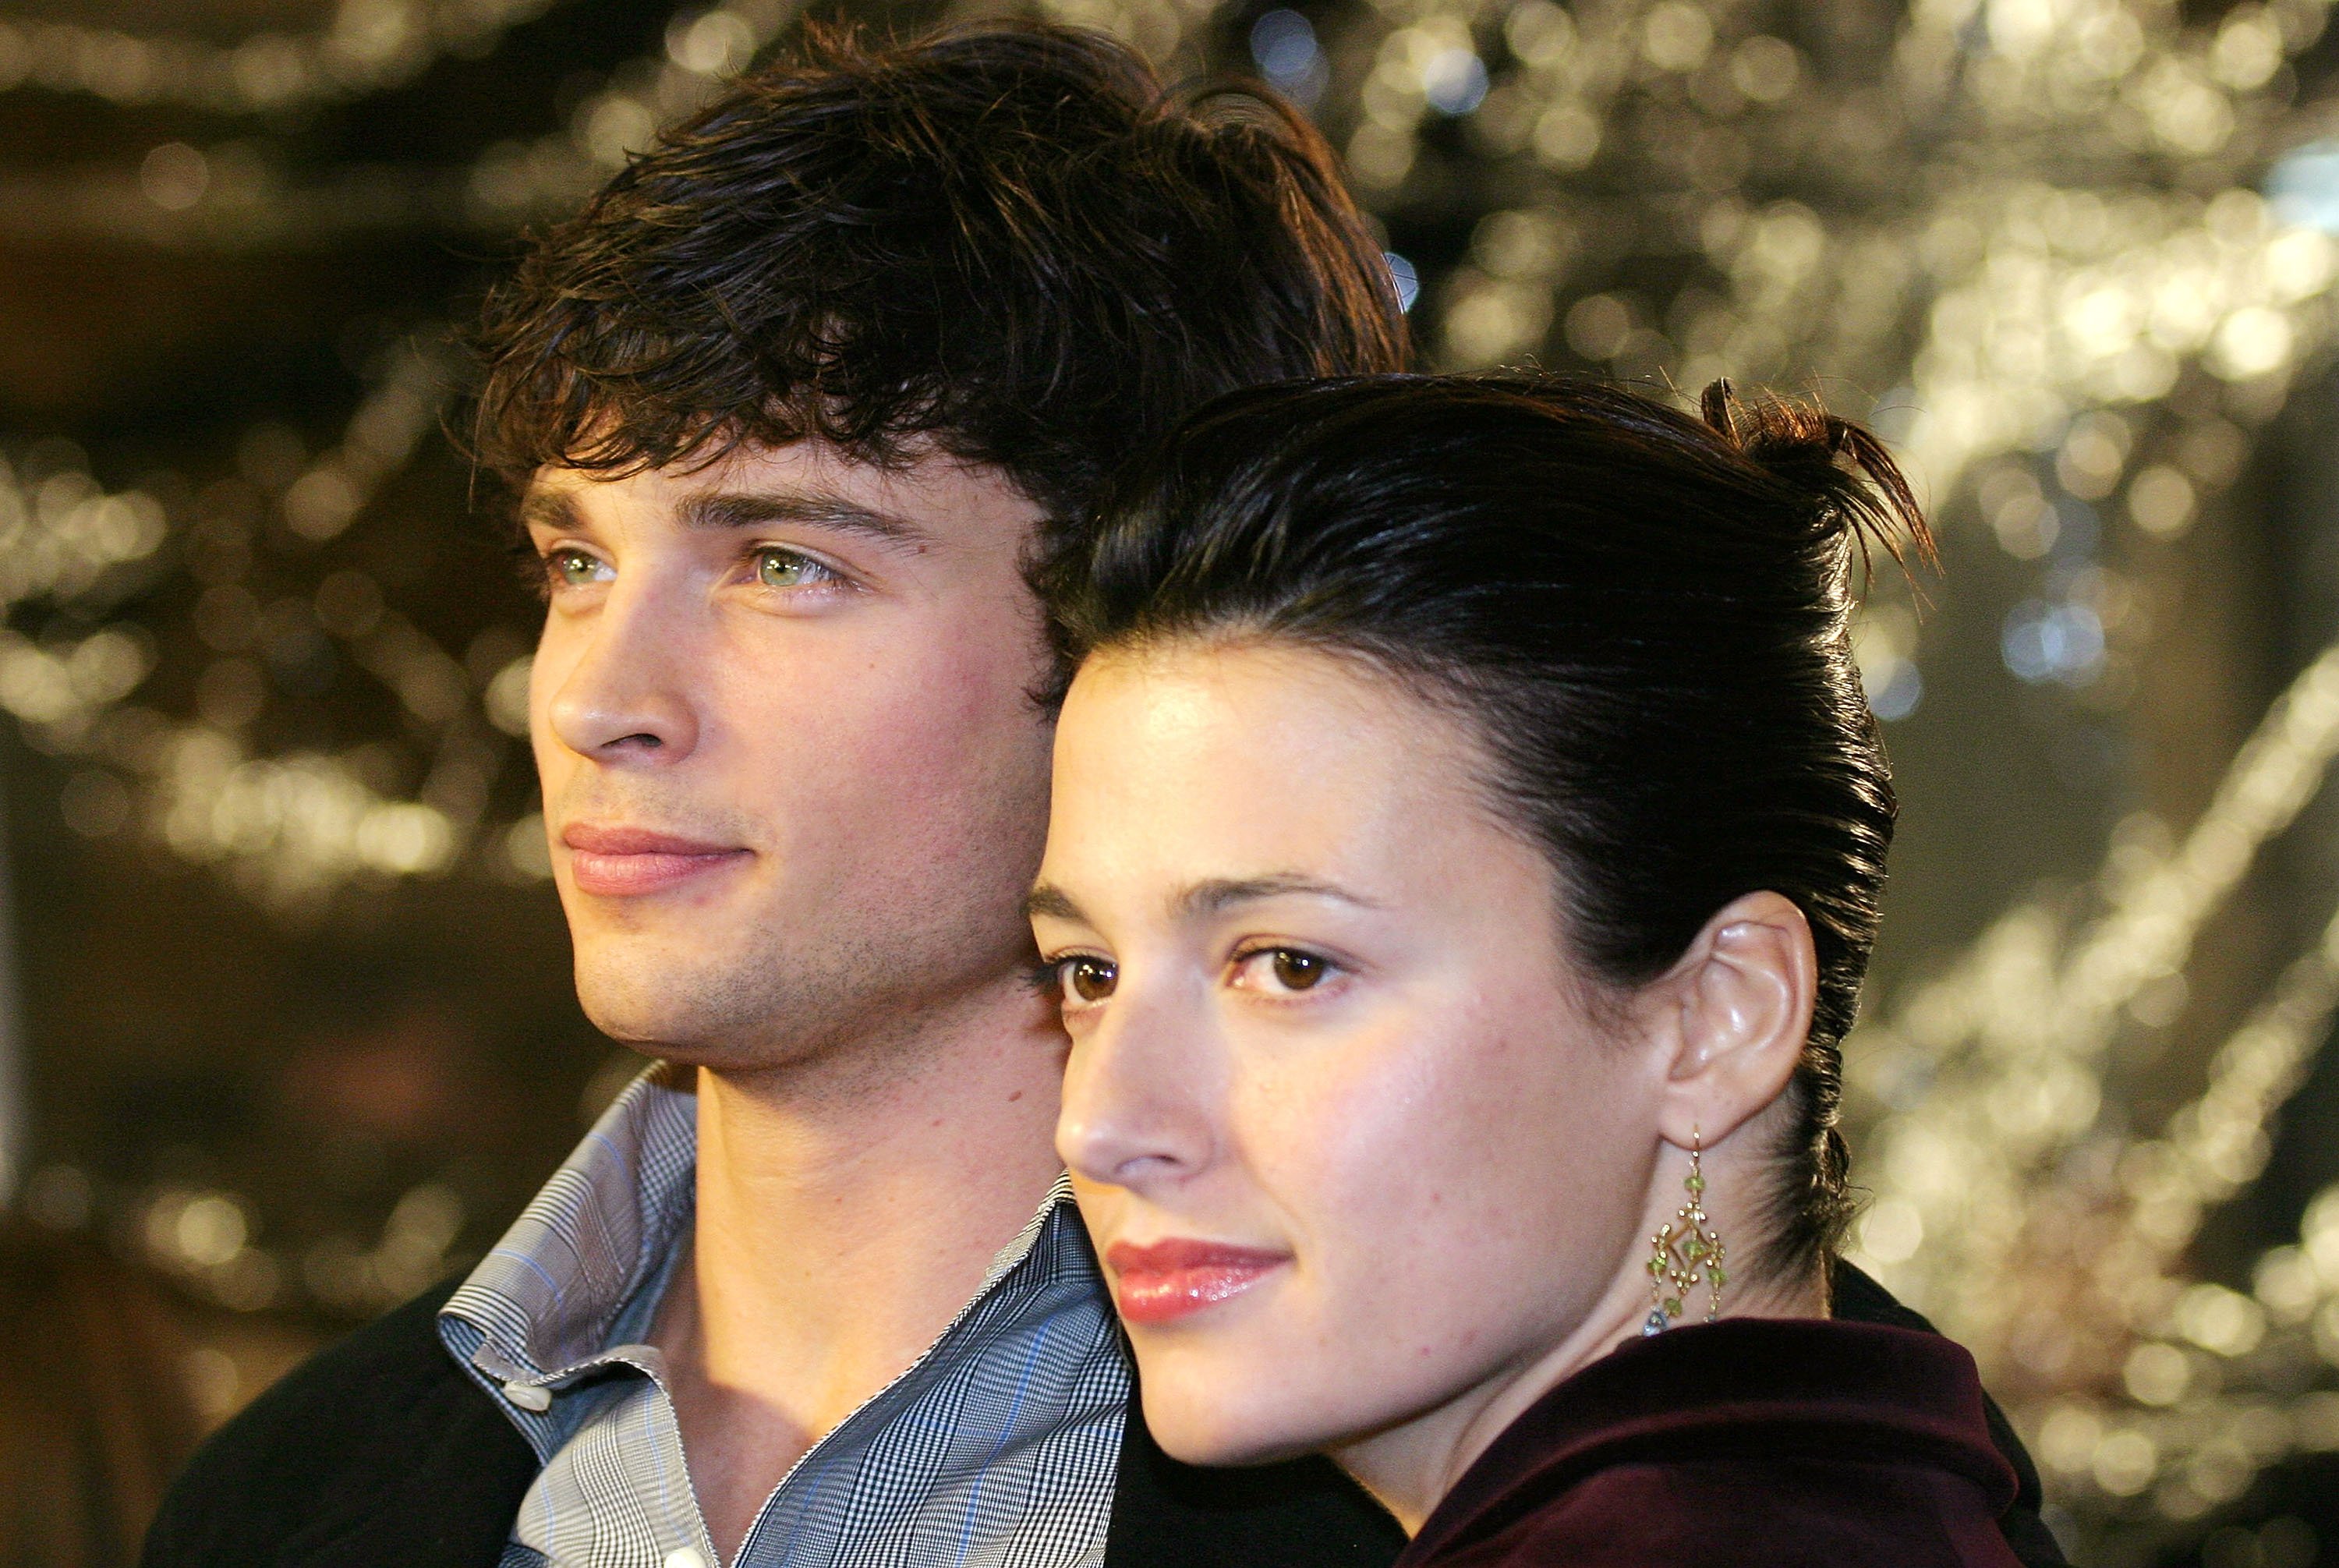 Tom Welling and Jamie White attend the "Cheaper By The Dozen" premiere on December 14, 2003 in Hollywood, California. Photo: Getty Images